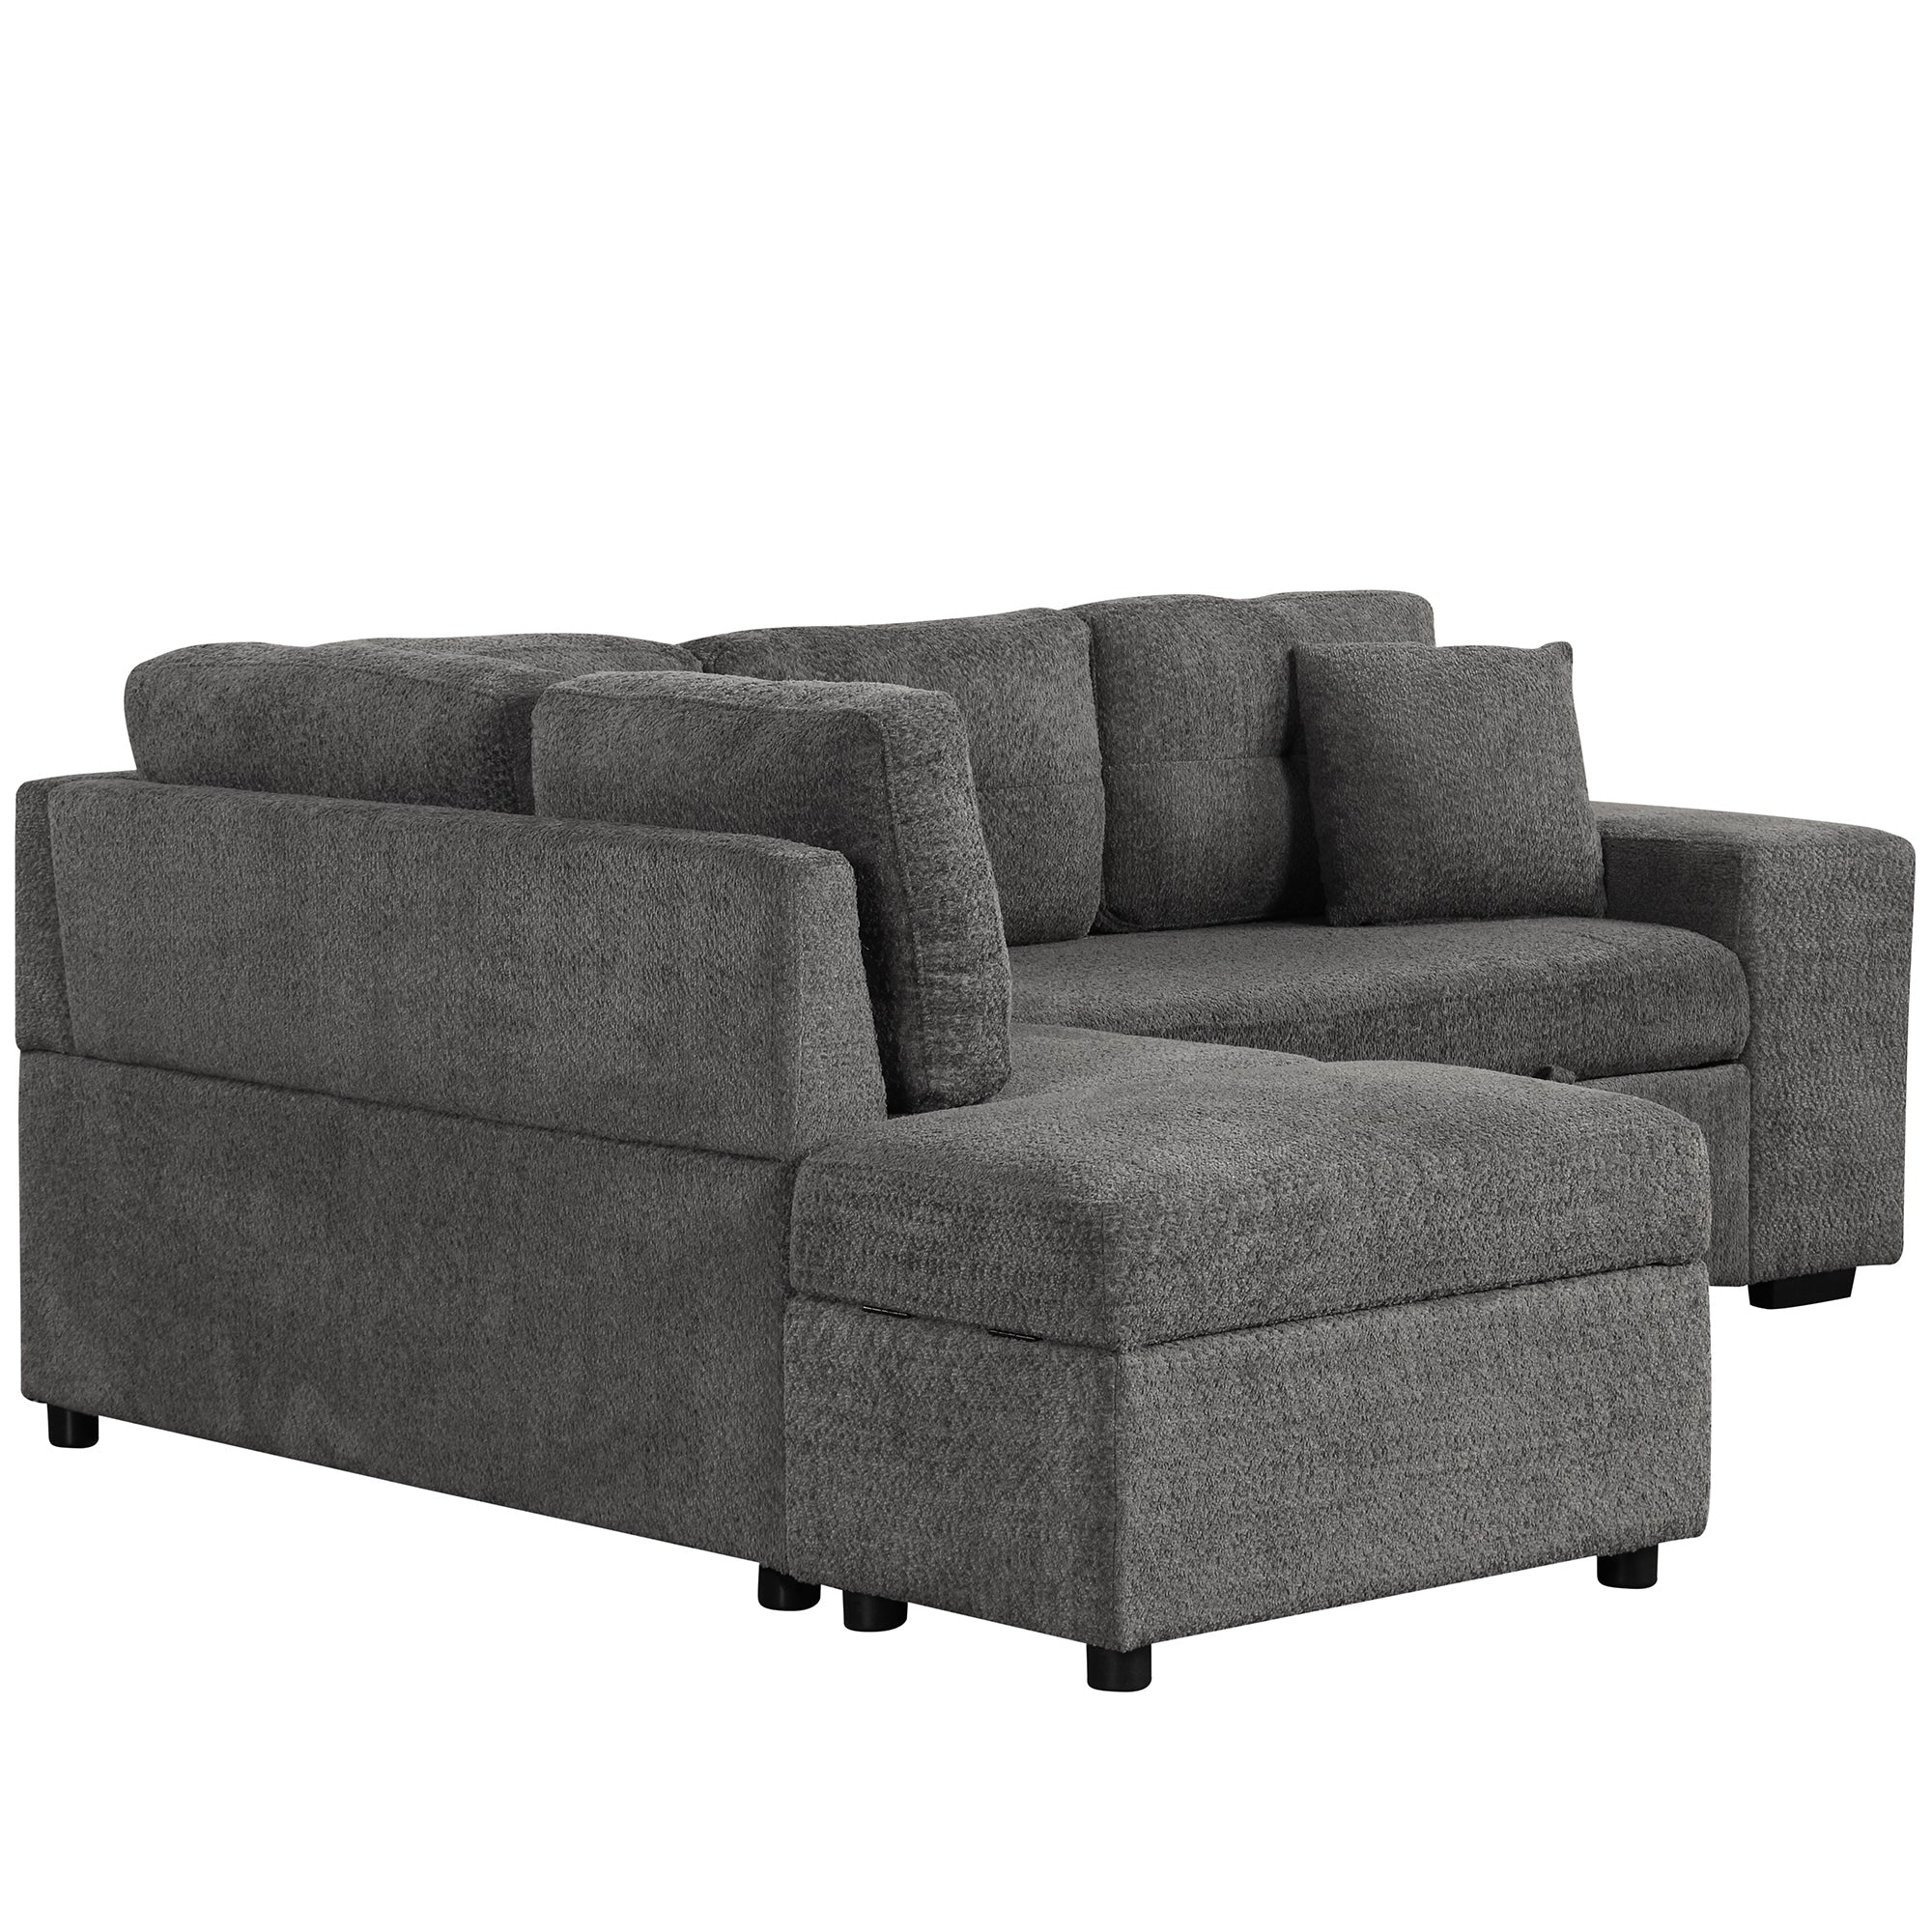 87.7" Convertible Sleeper Sectional Sofa w/ Storage Ottoman, Pillows, Stools, Charger & USB Ports - Dark Gray-Sleeper Sectionals-American Furniture Outlet